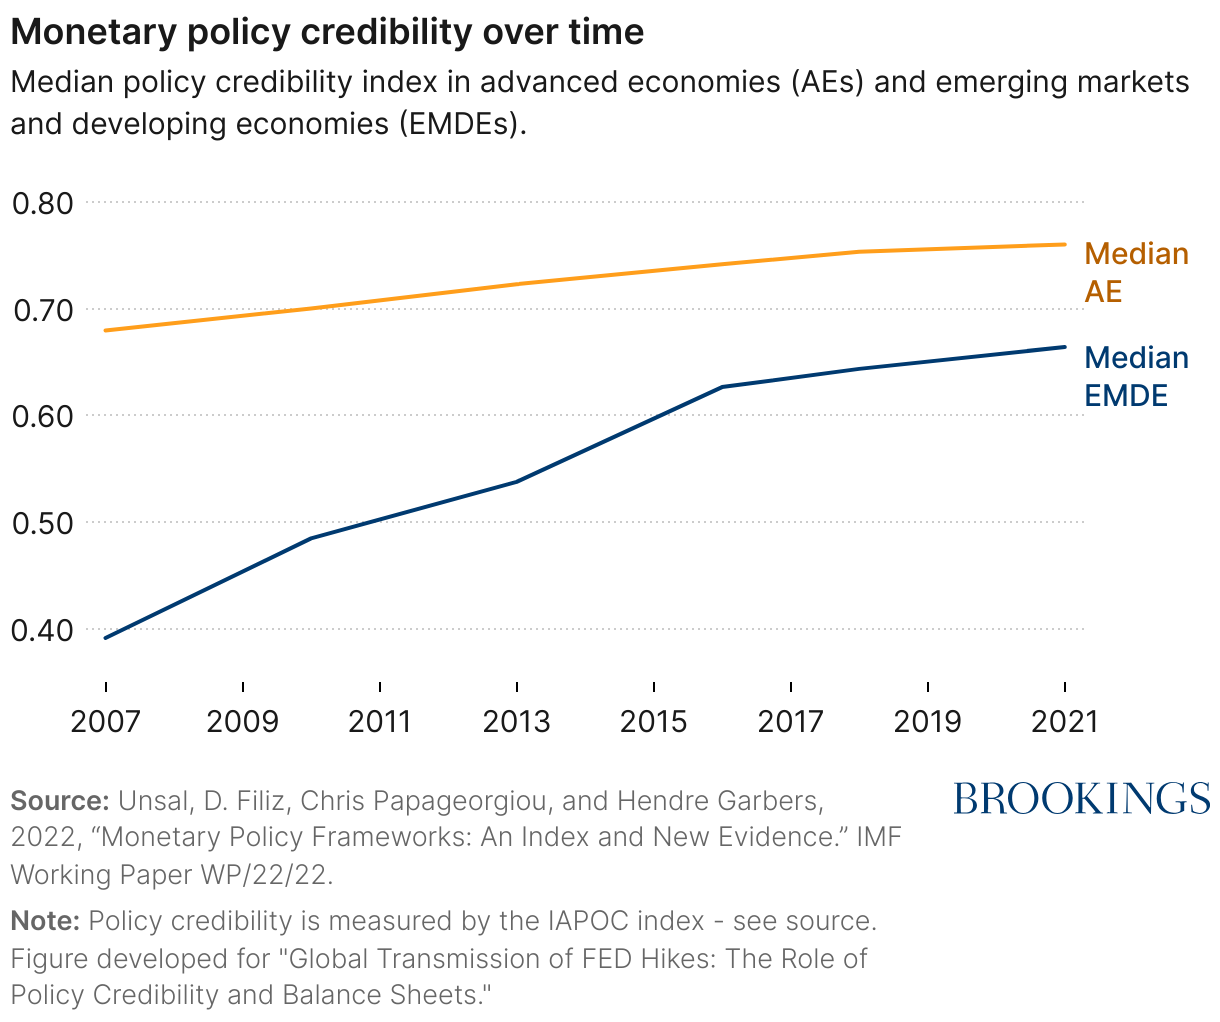 Plot of median policy credibility (IAPOC) index in AEs and EMDEs from 2007-2021.